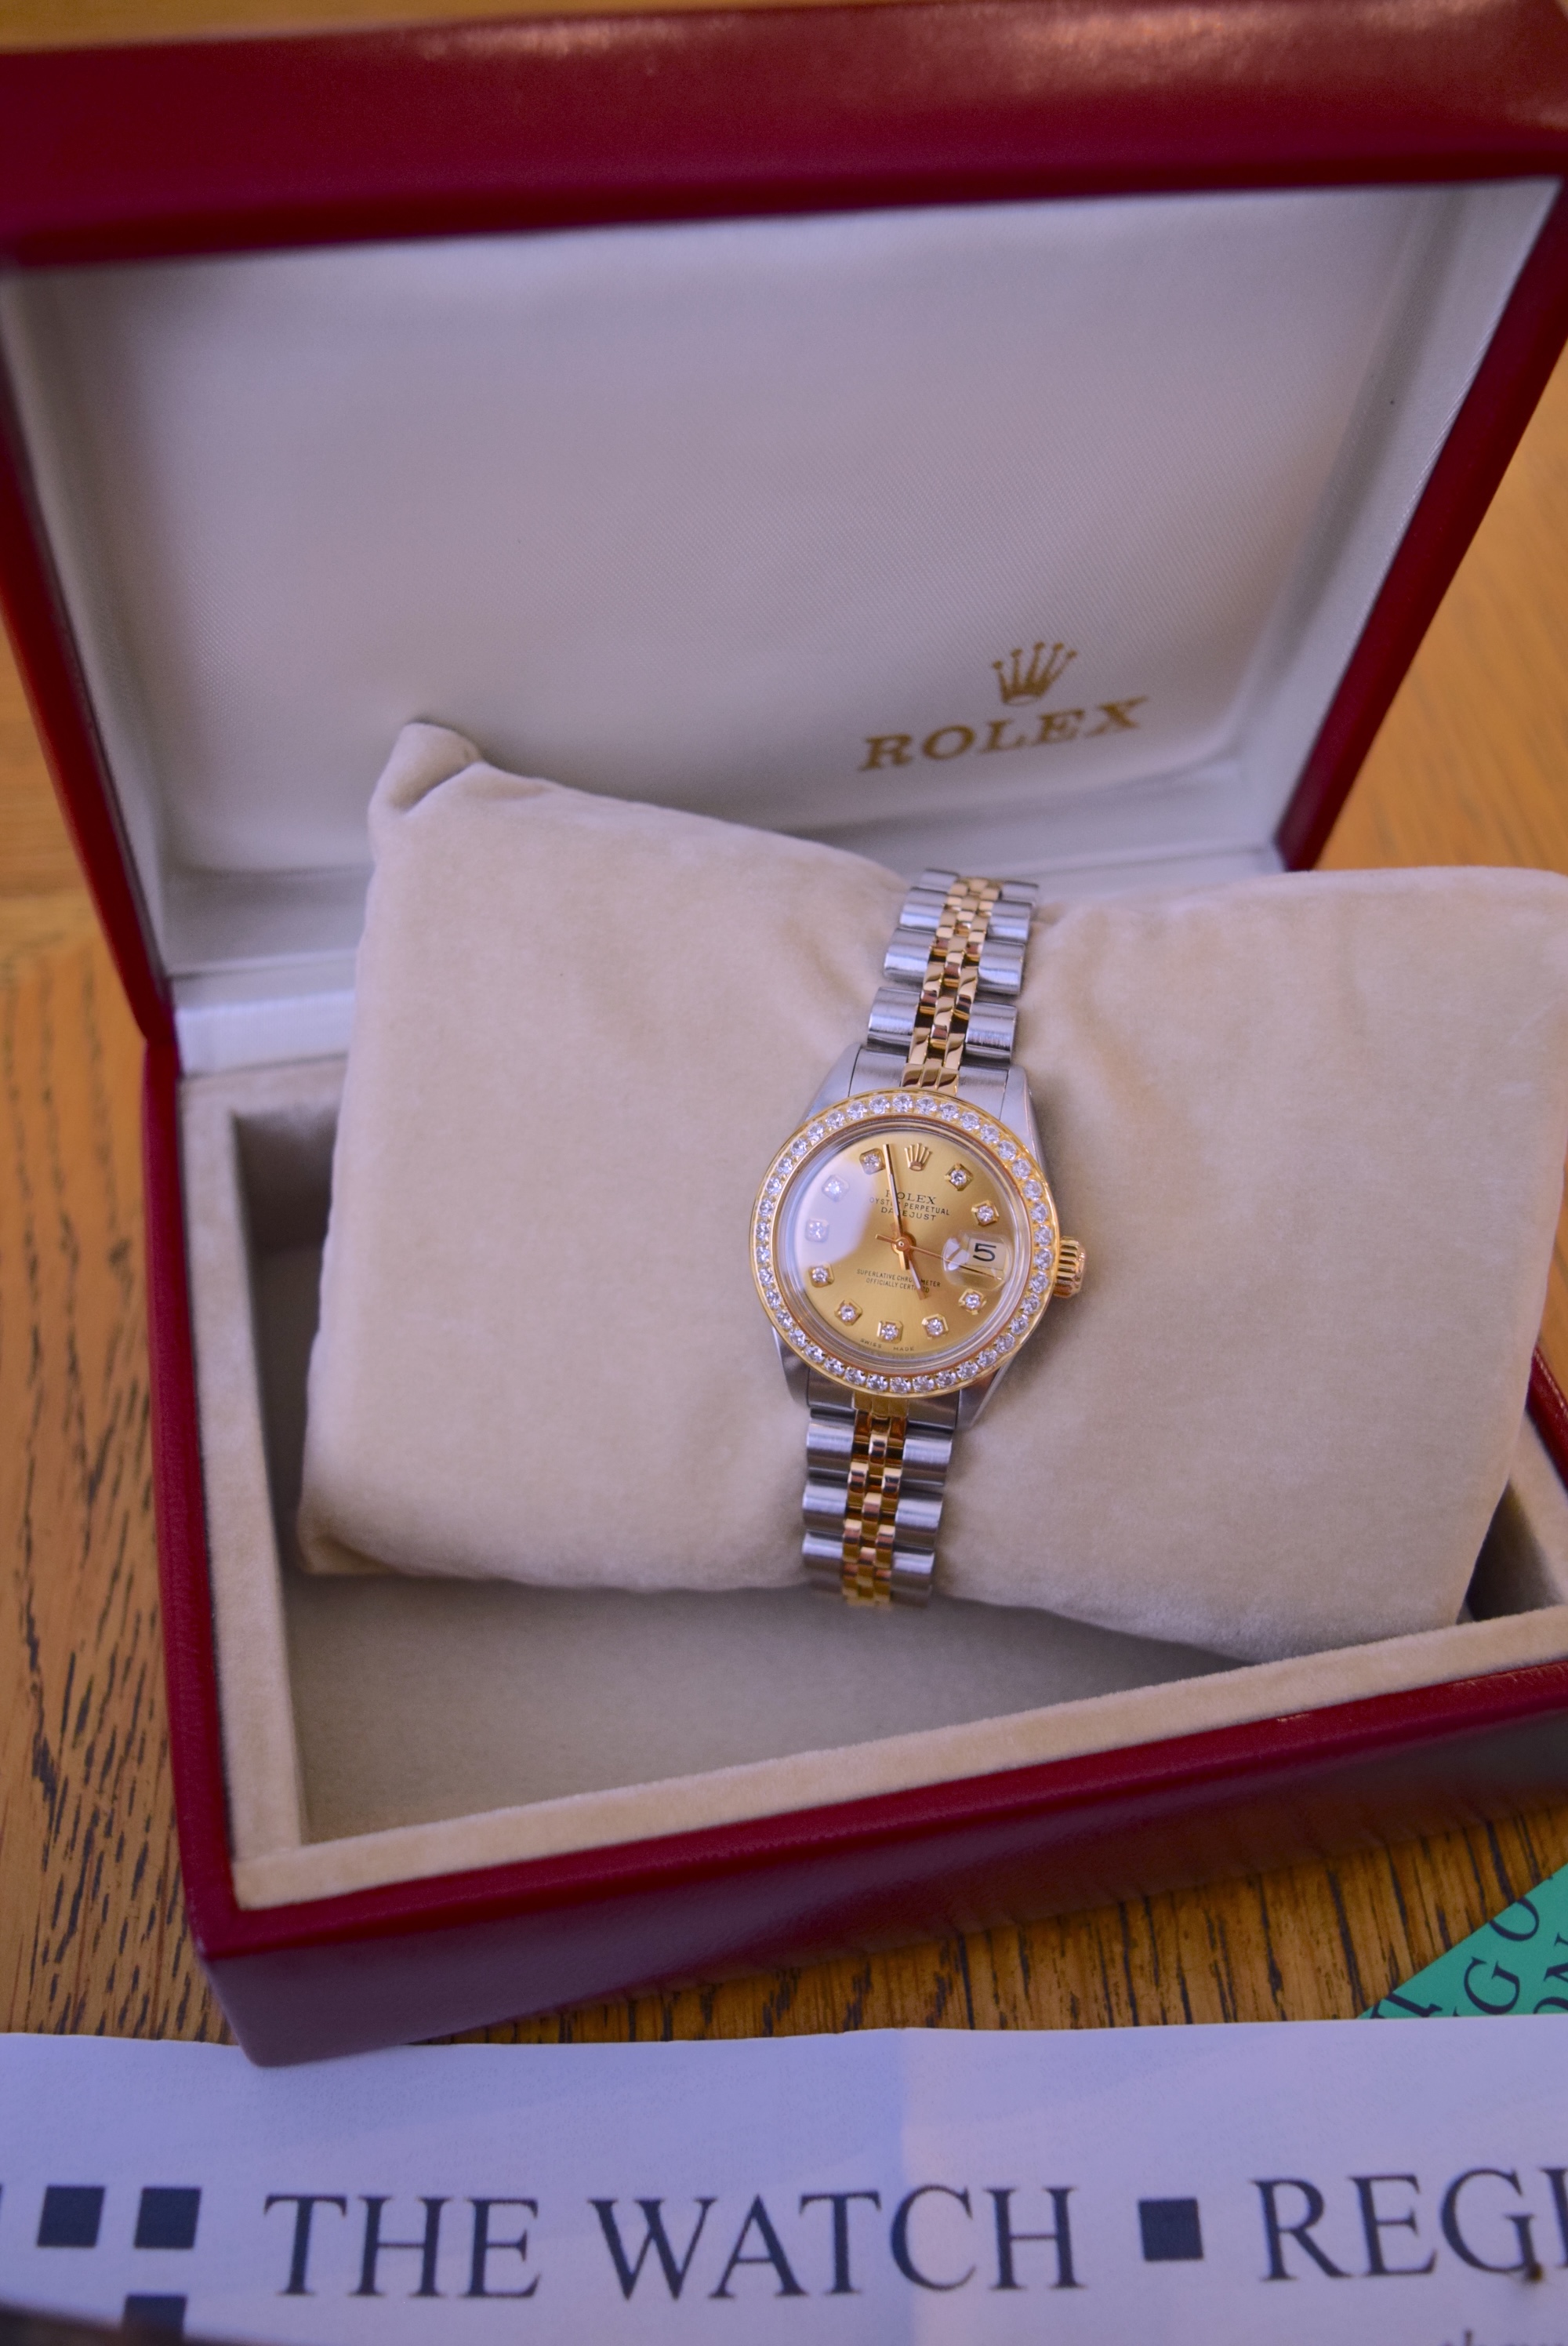 ROLEX 18CT YELLOW GOLD/ STEEL DATEJUST REF. 6917 - CUSTOM CHAMPAGNE DIAL/ BEZEL - Image 11 of 24